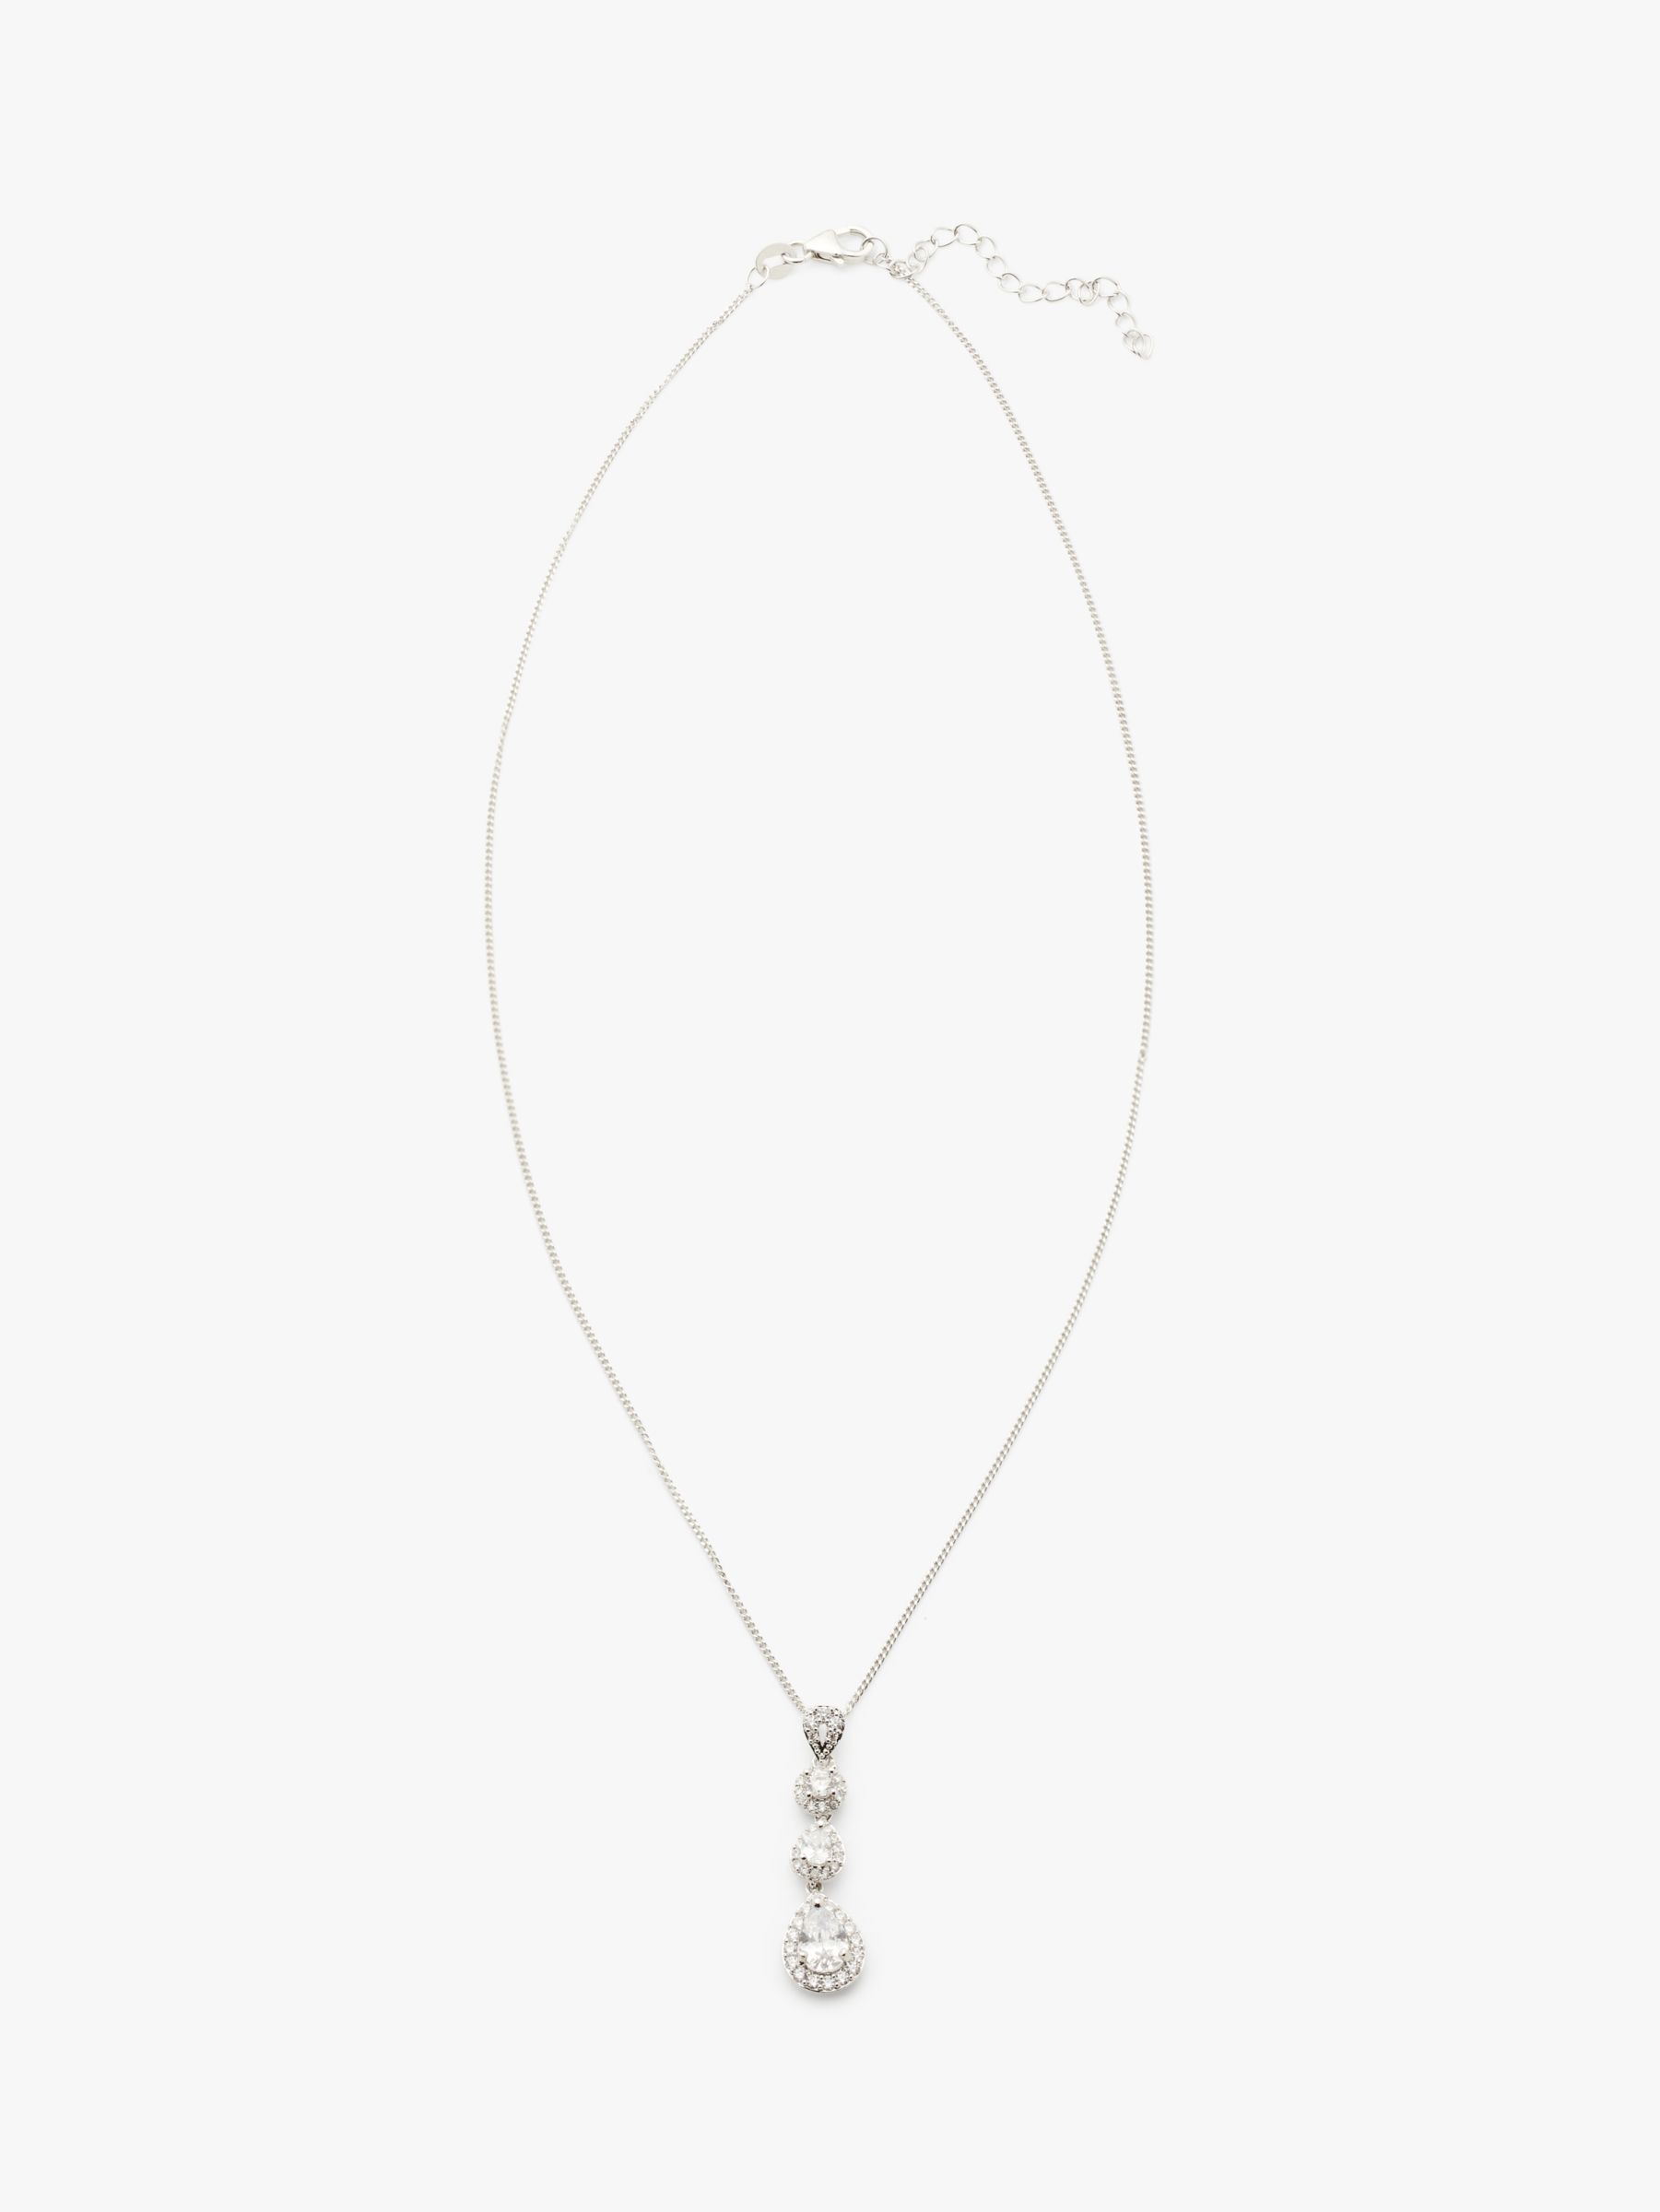 Ivory & Co. Ashford Crystal Pendant Necklace, Silver at John Lewis ...